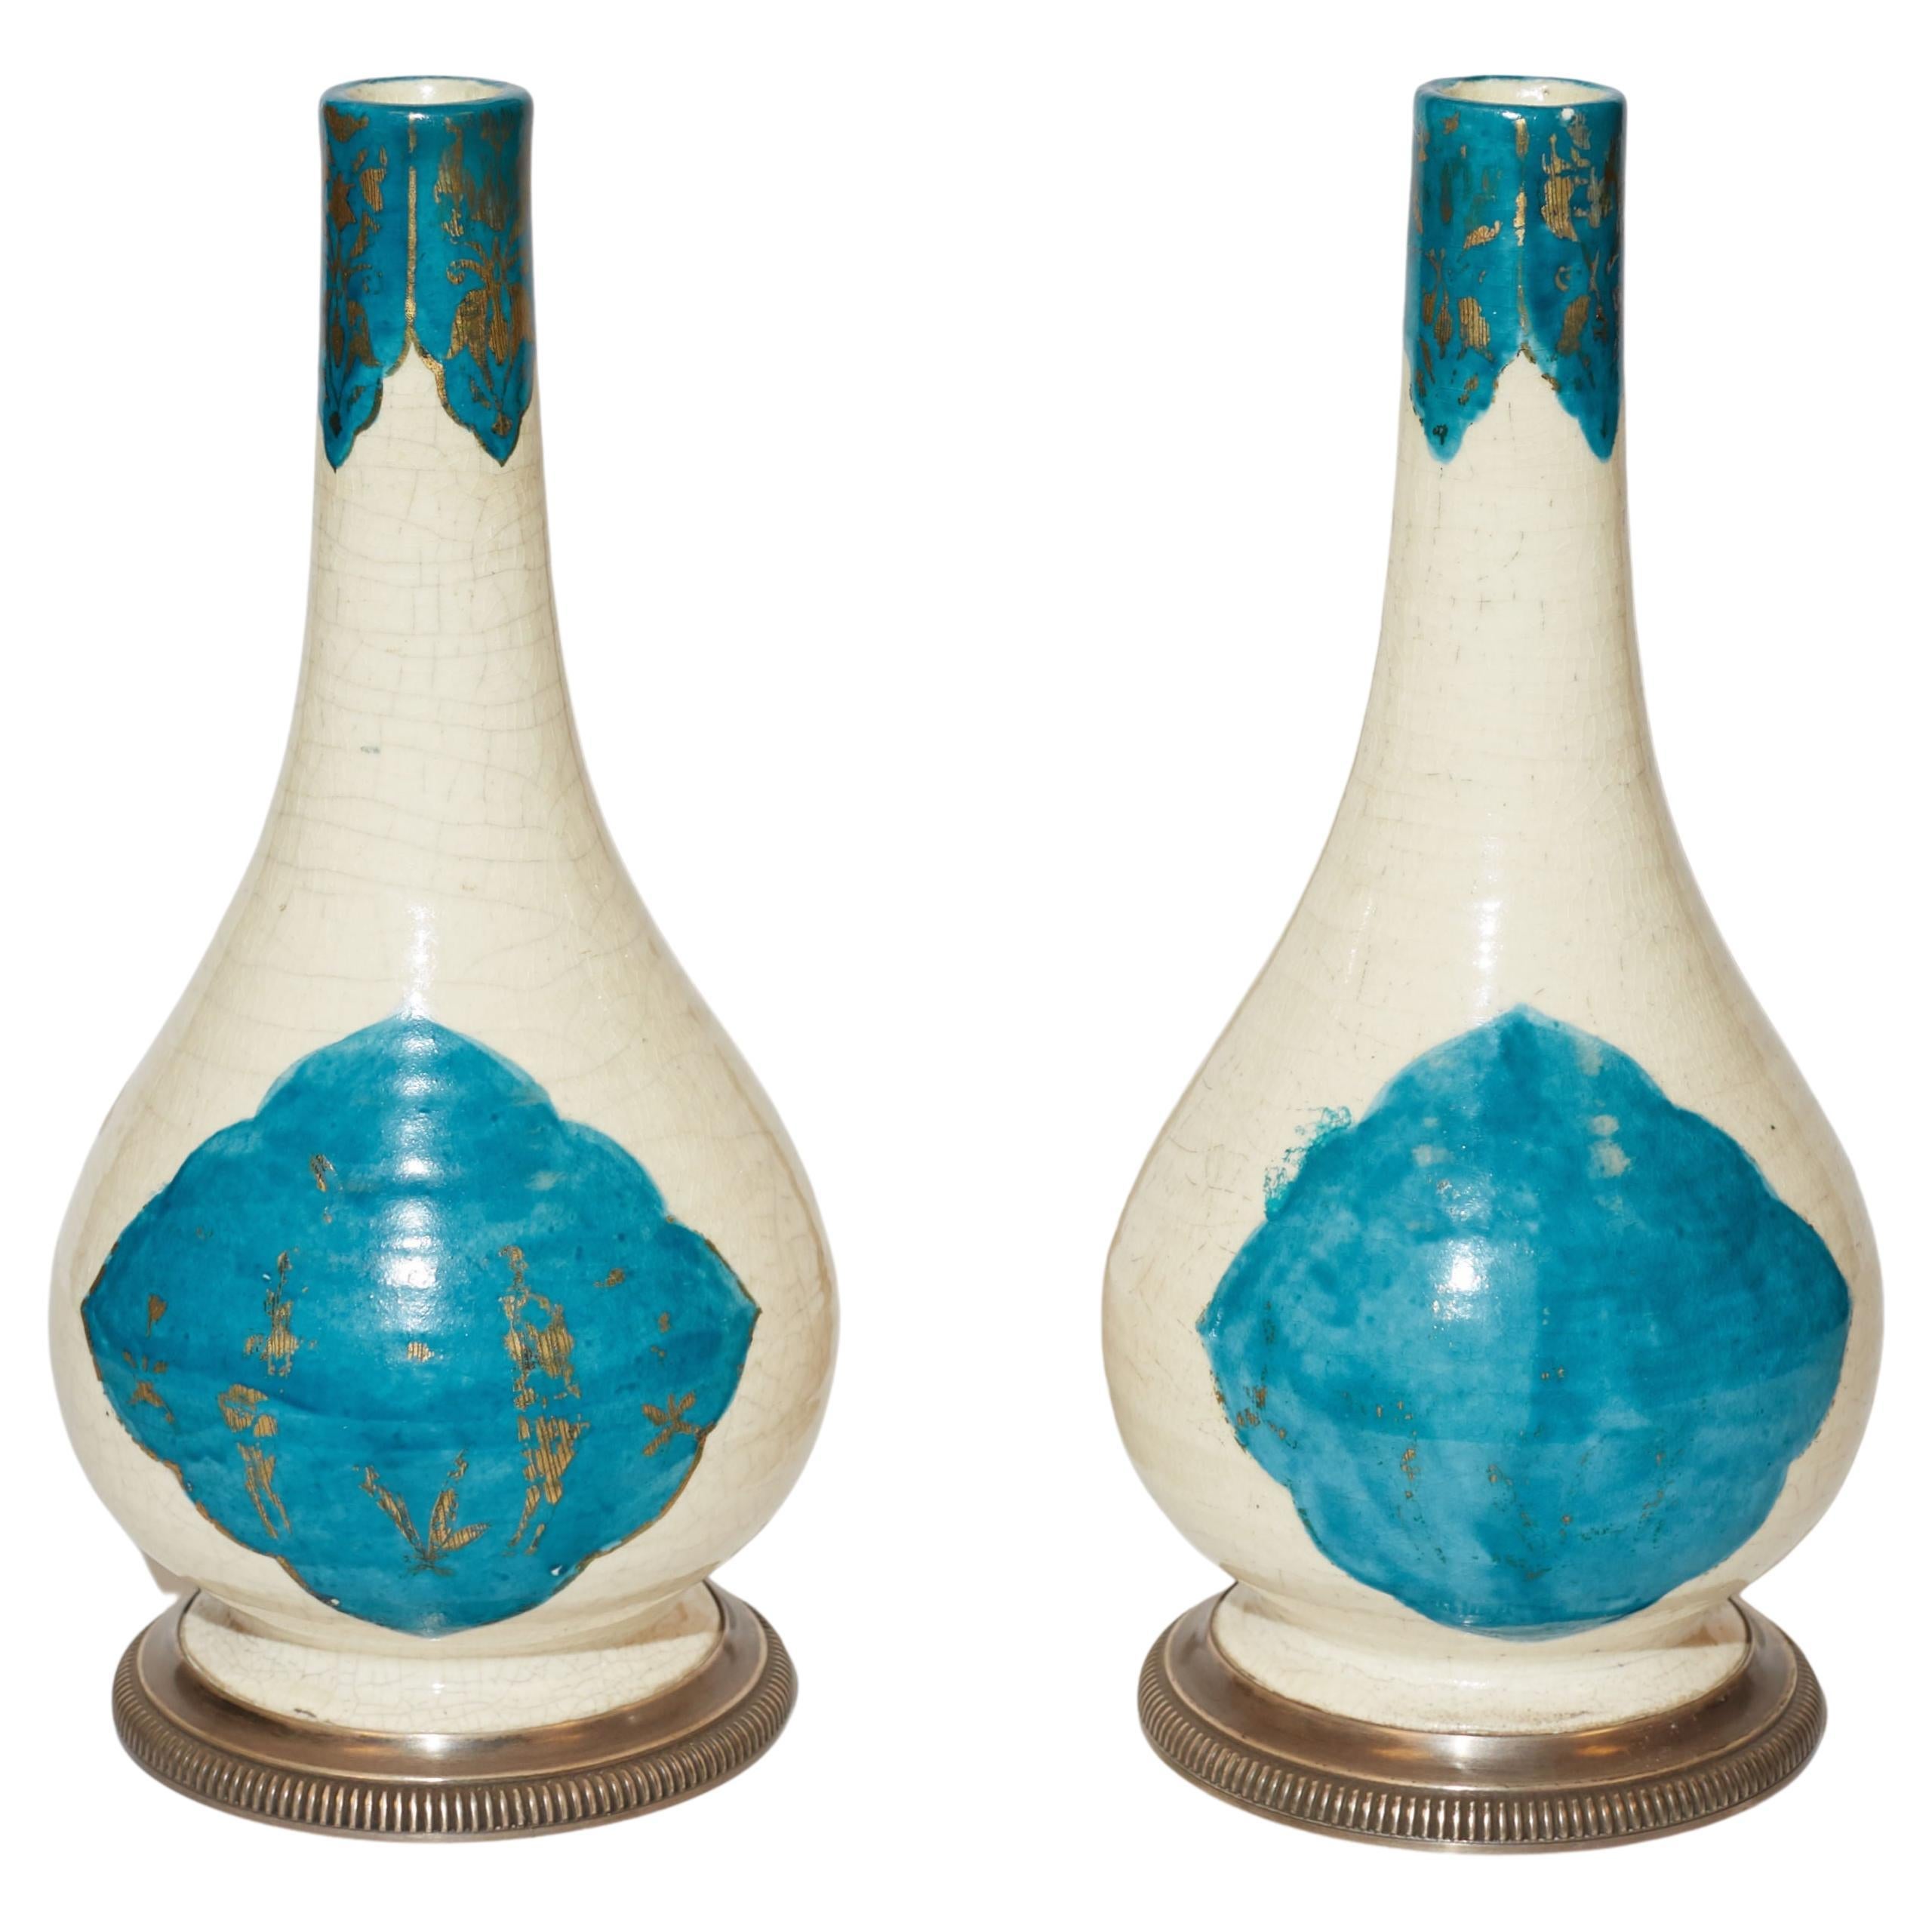 Pair Cartier Silver-Mounted Persian Ceramic Bottle Vases